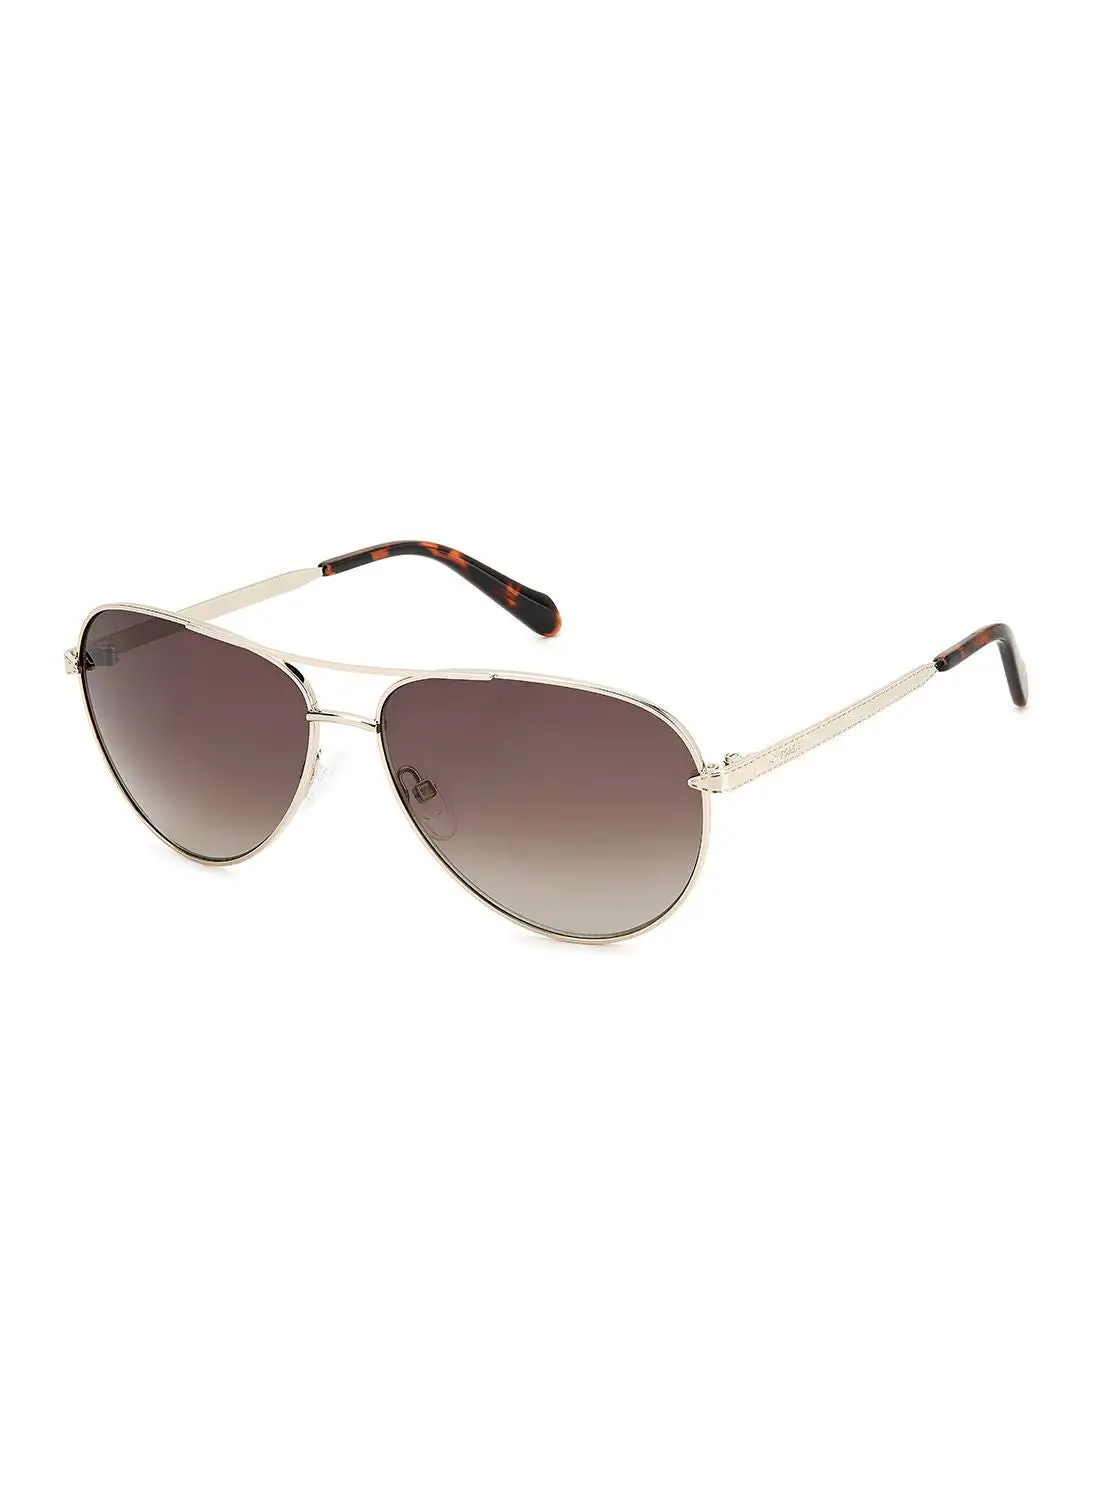 FOSSIL Women's UV Protection Pilot Sunglasses - Fos 3141/G/S Lgh Gold 59 - Lens Size: 59 Mm